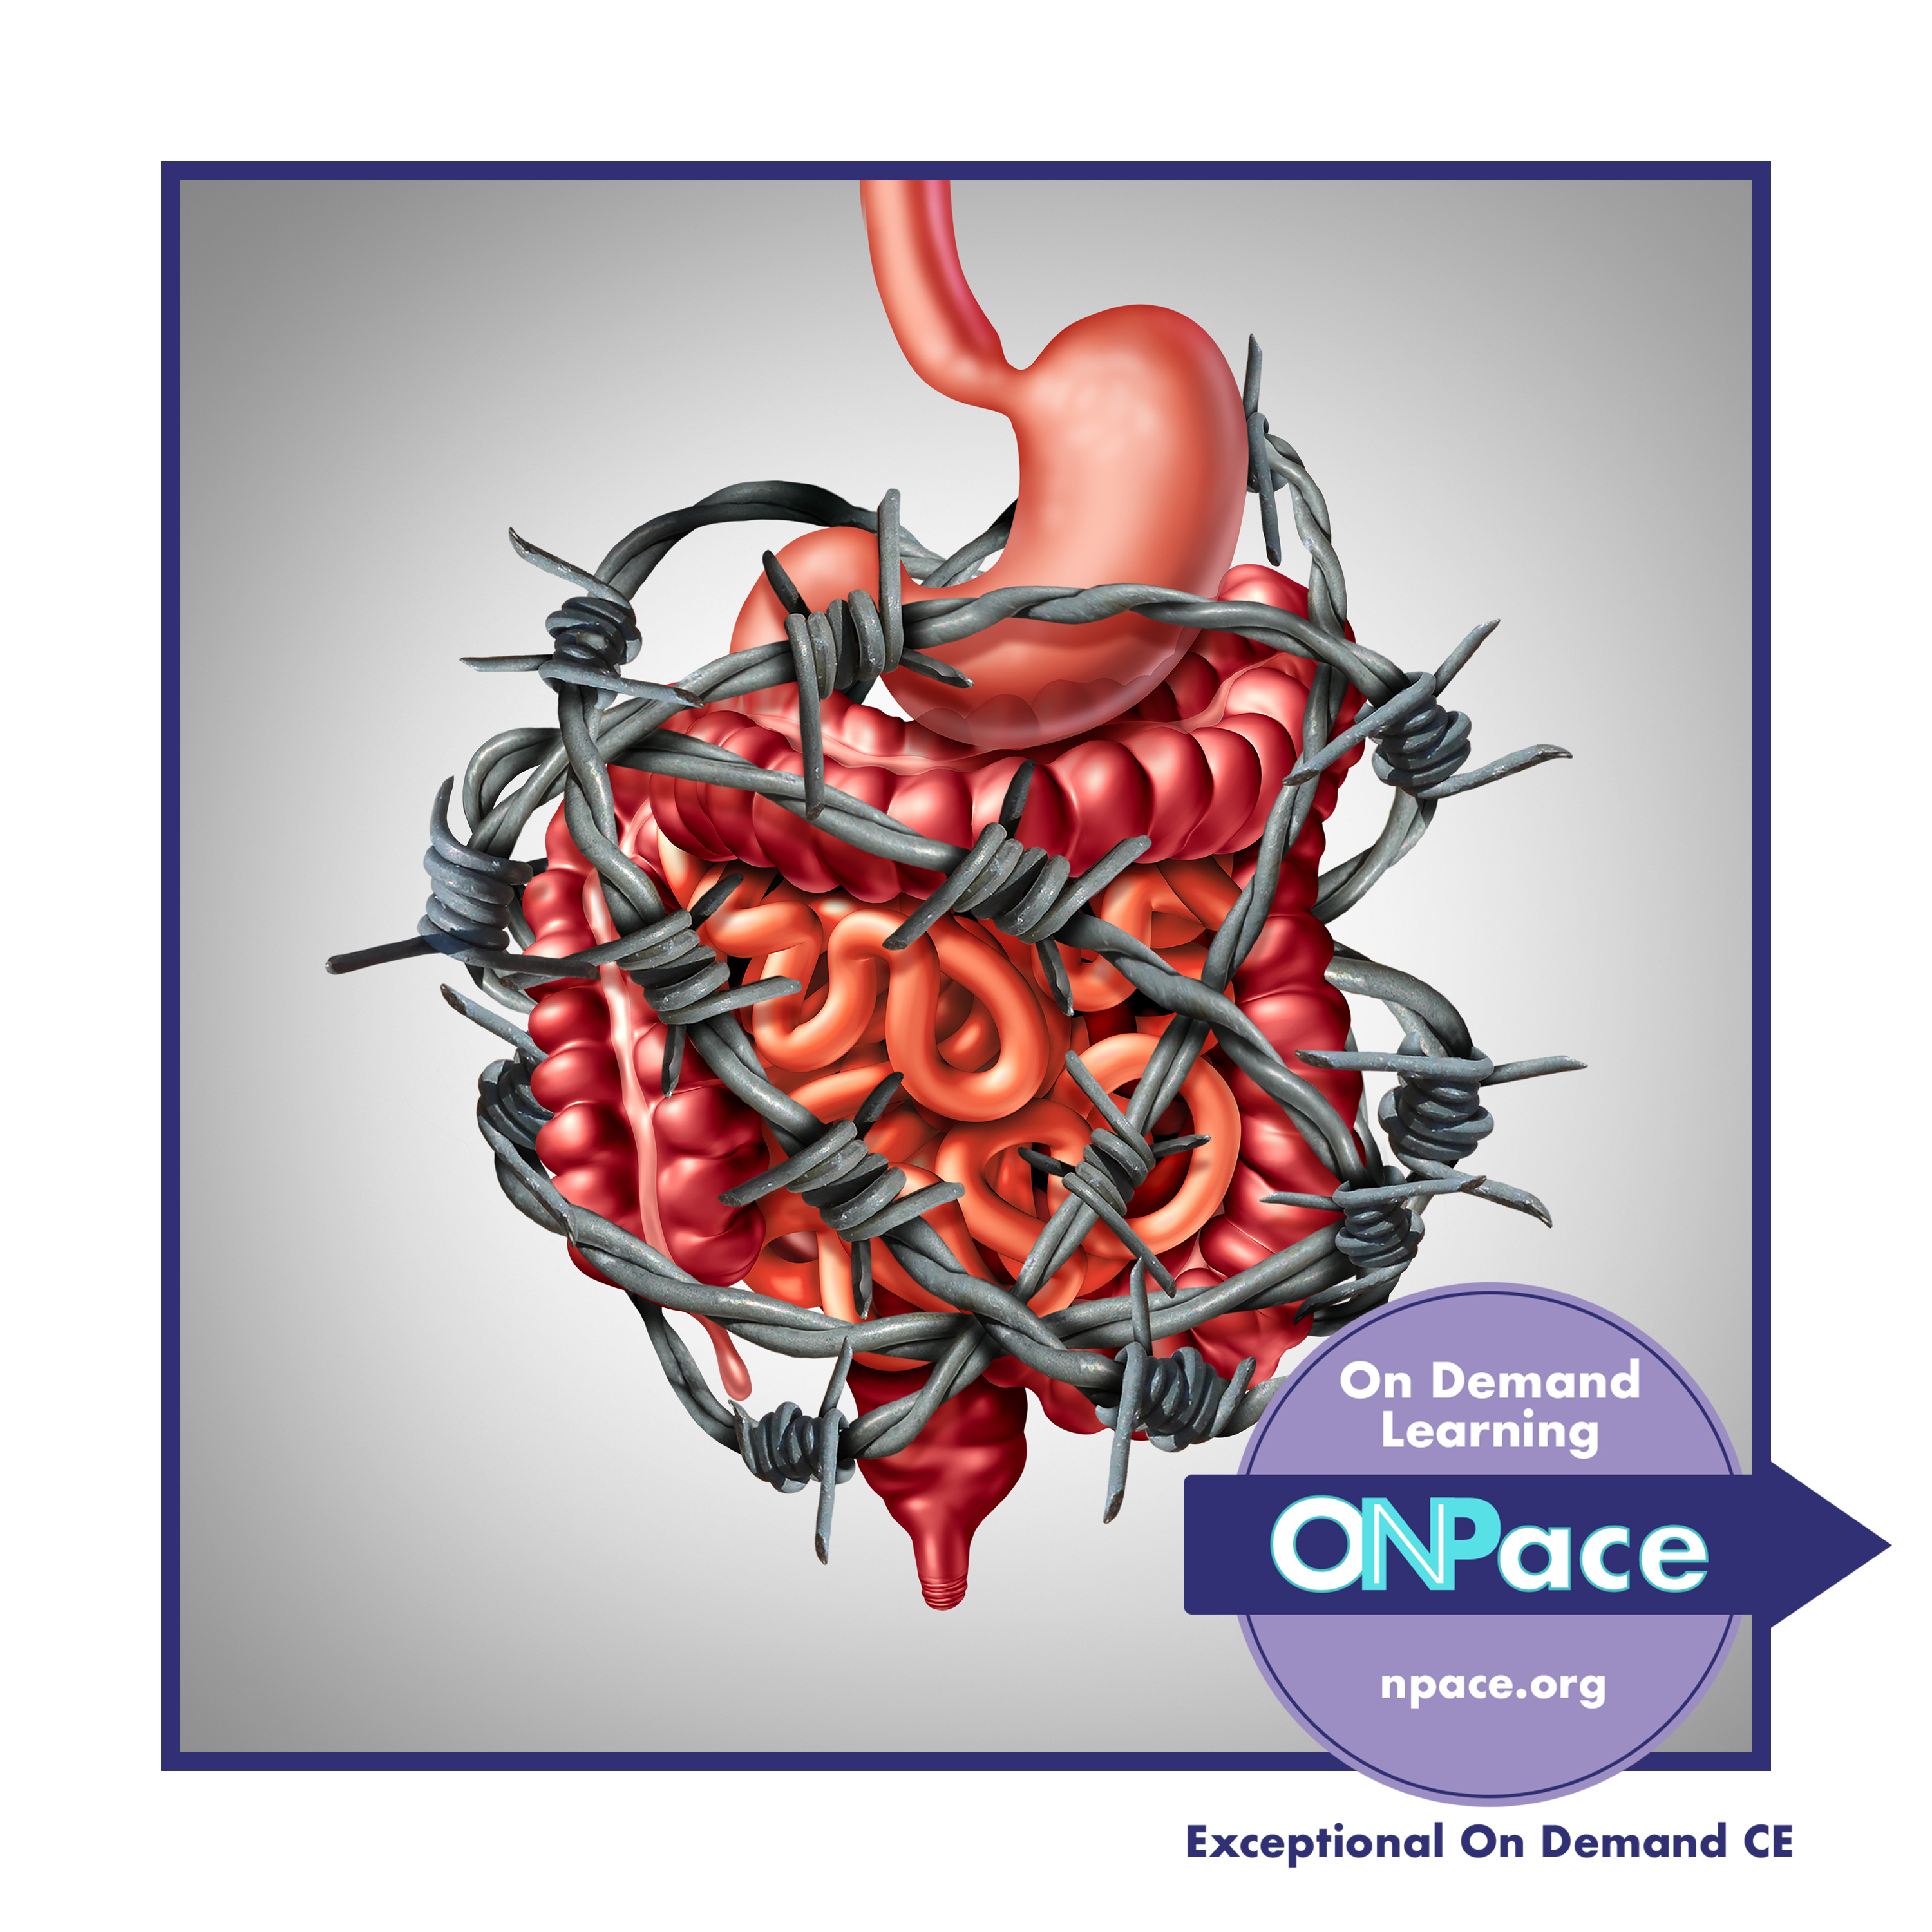 NPACE Functional Bowel Disorders: A Discussion of Heartburn, GERD, and IBS/Chronic Constipation